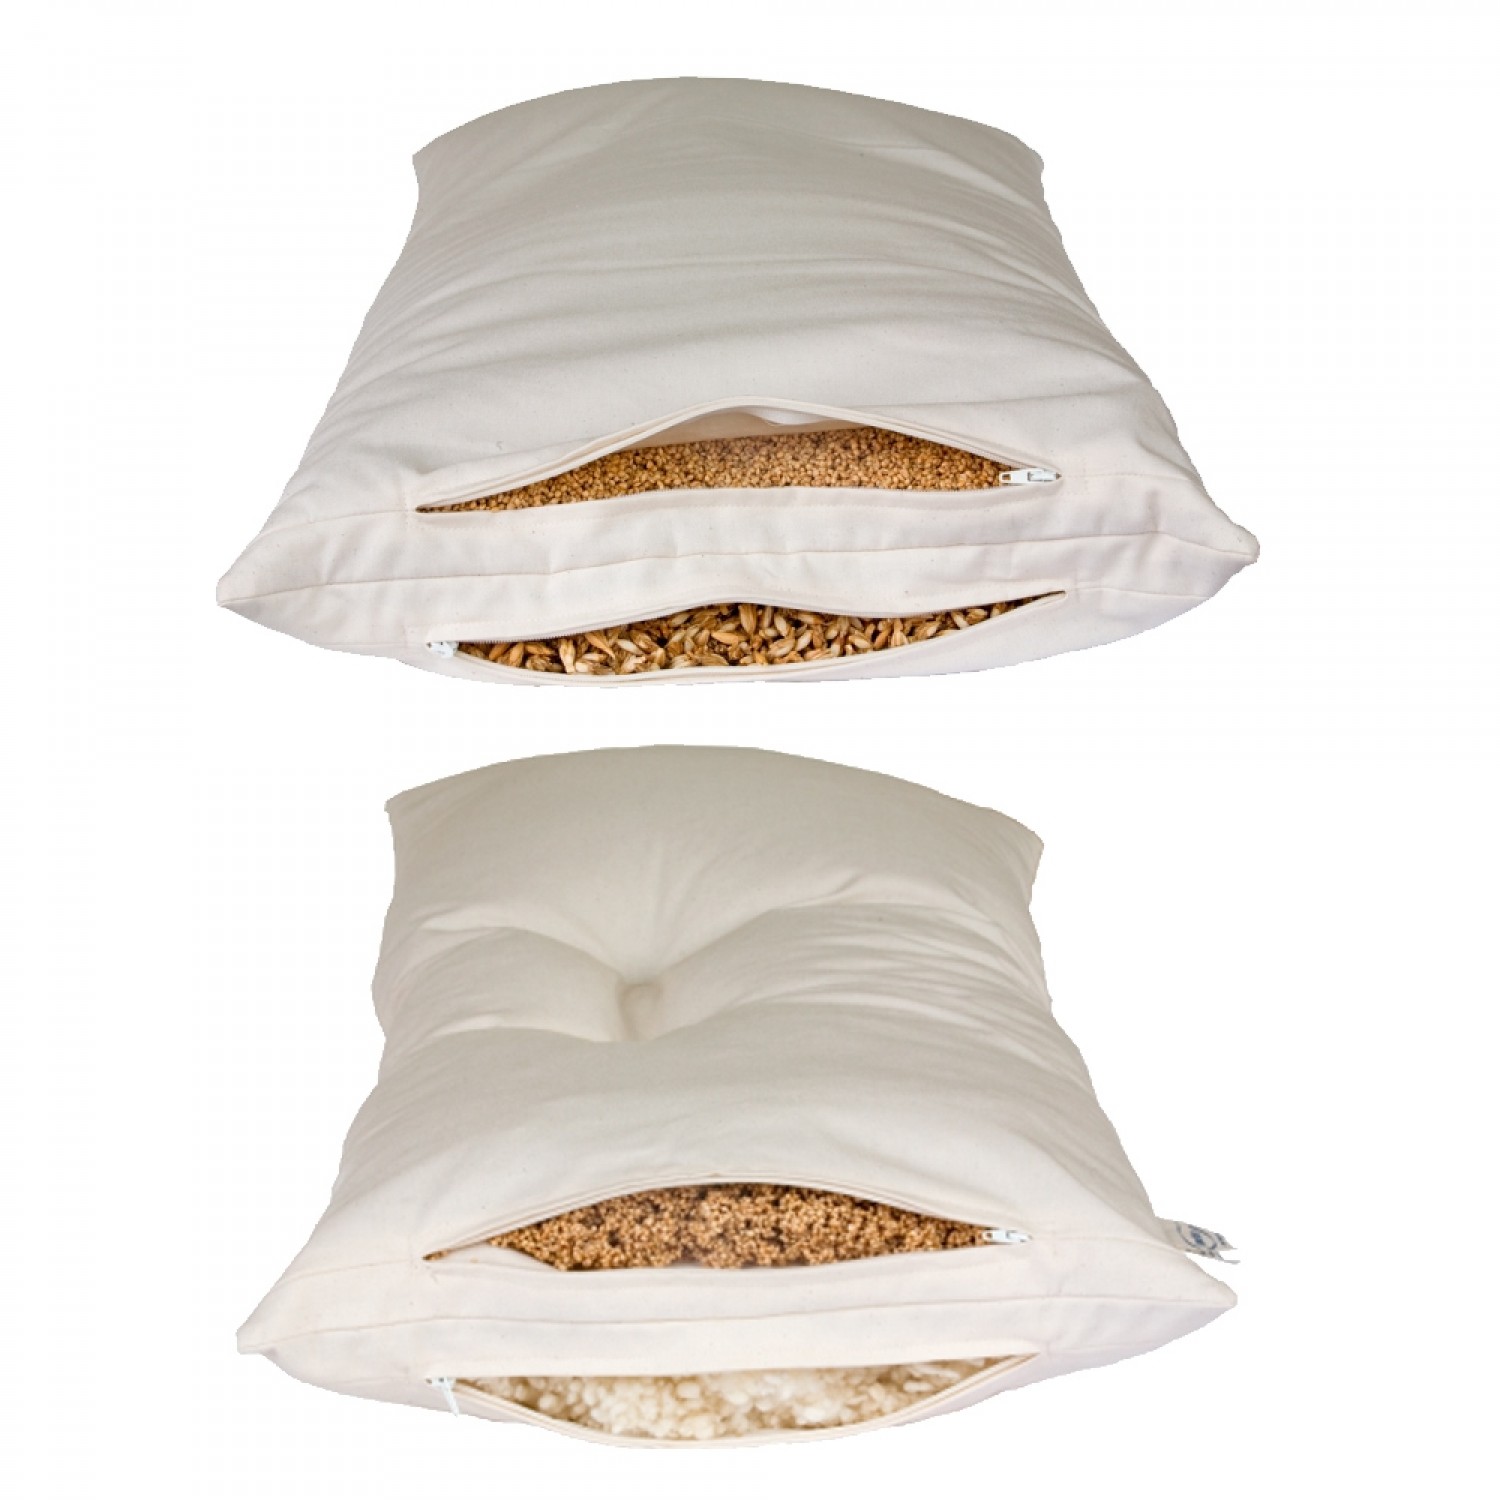 Combined 2-Chamber Pillow with organic fillings | speltex